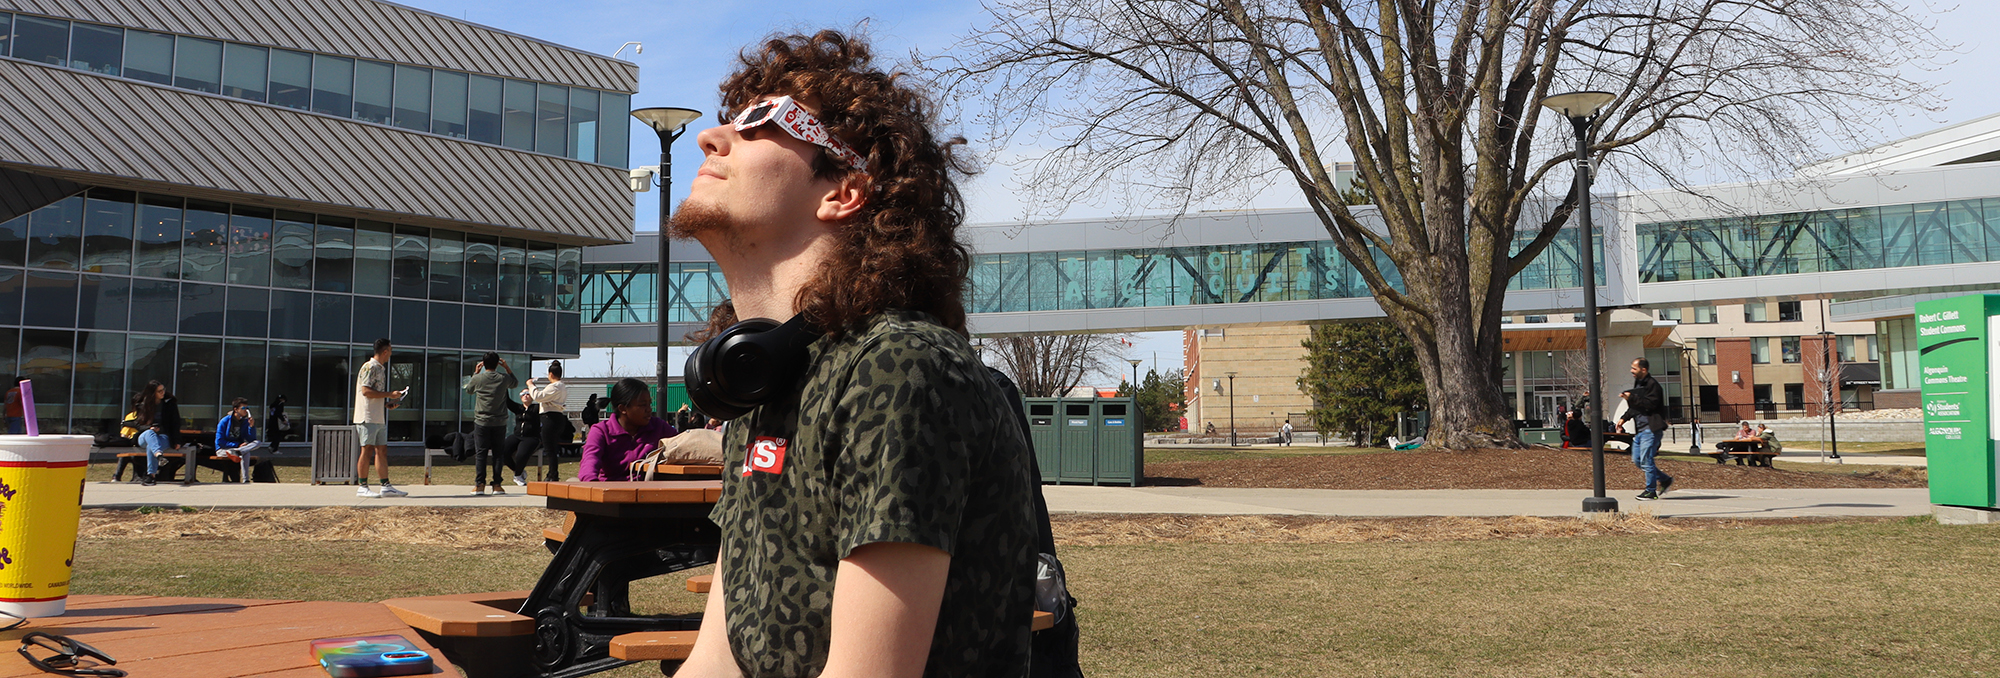 Izach Carberry, a game development student, watches the beginning of the eclipse with his friends.